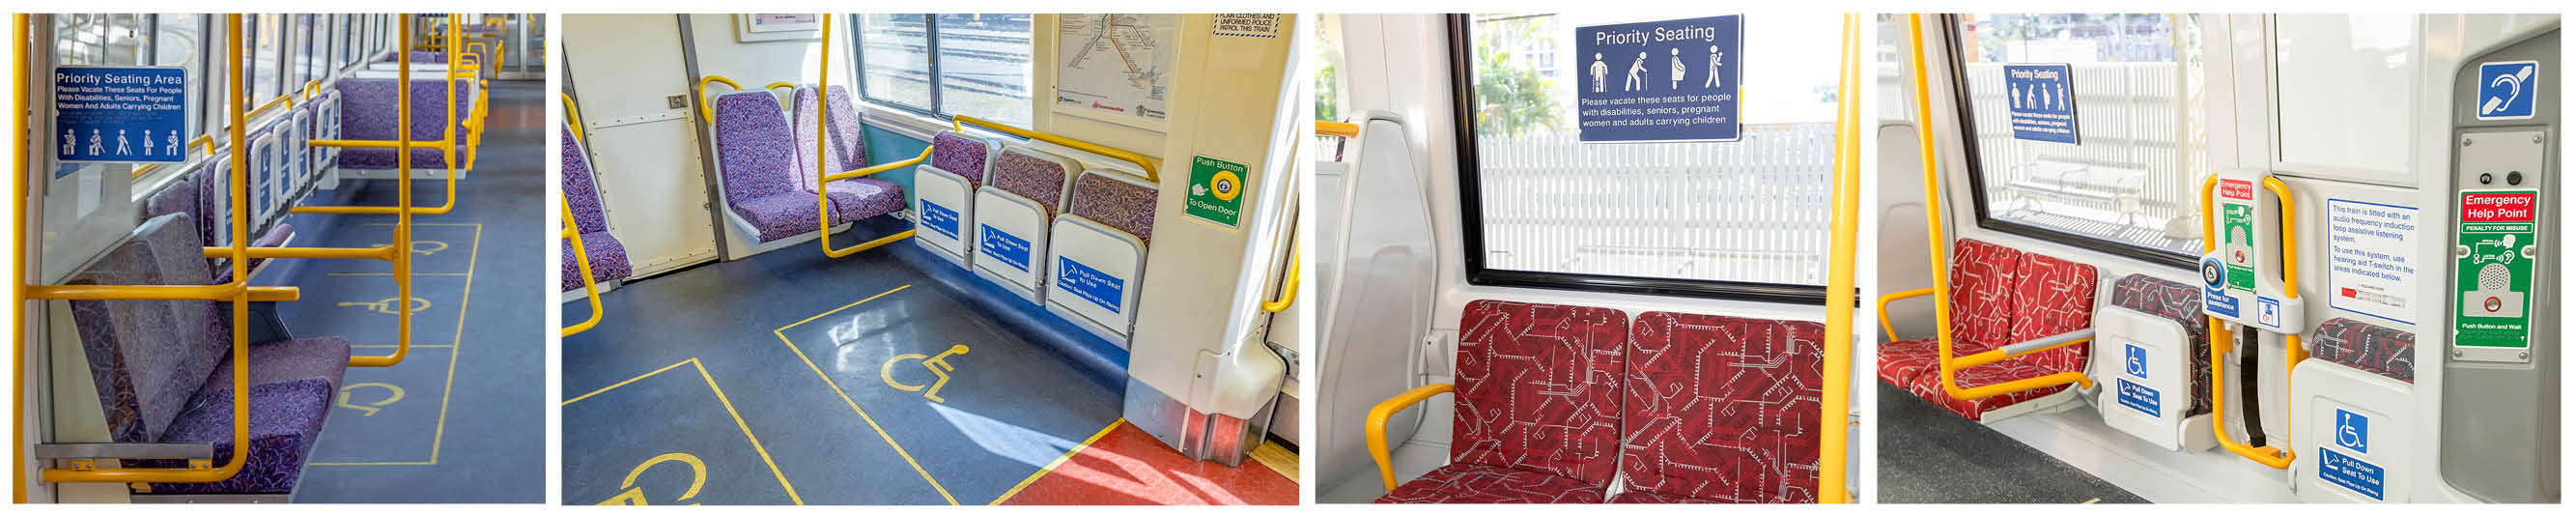 Photos of priority seating and allocated spaces and signage